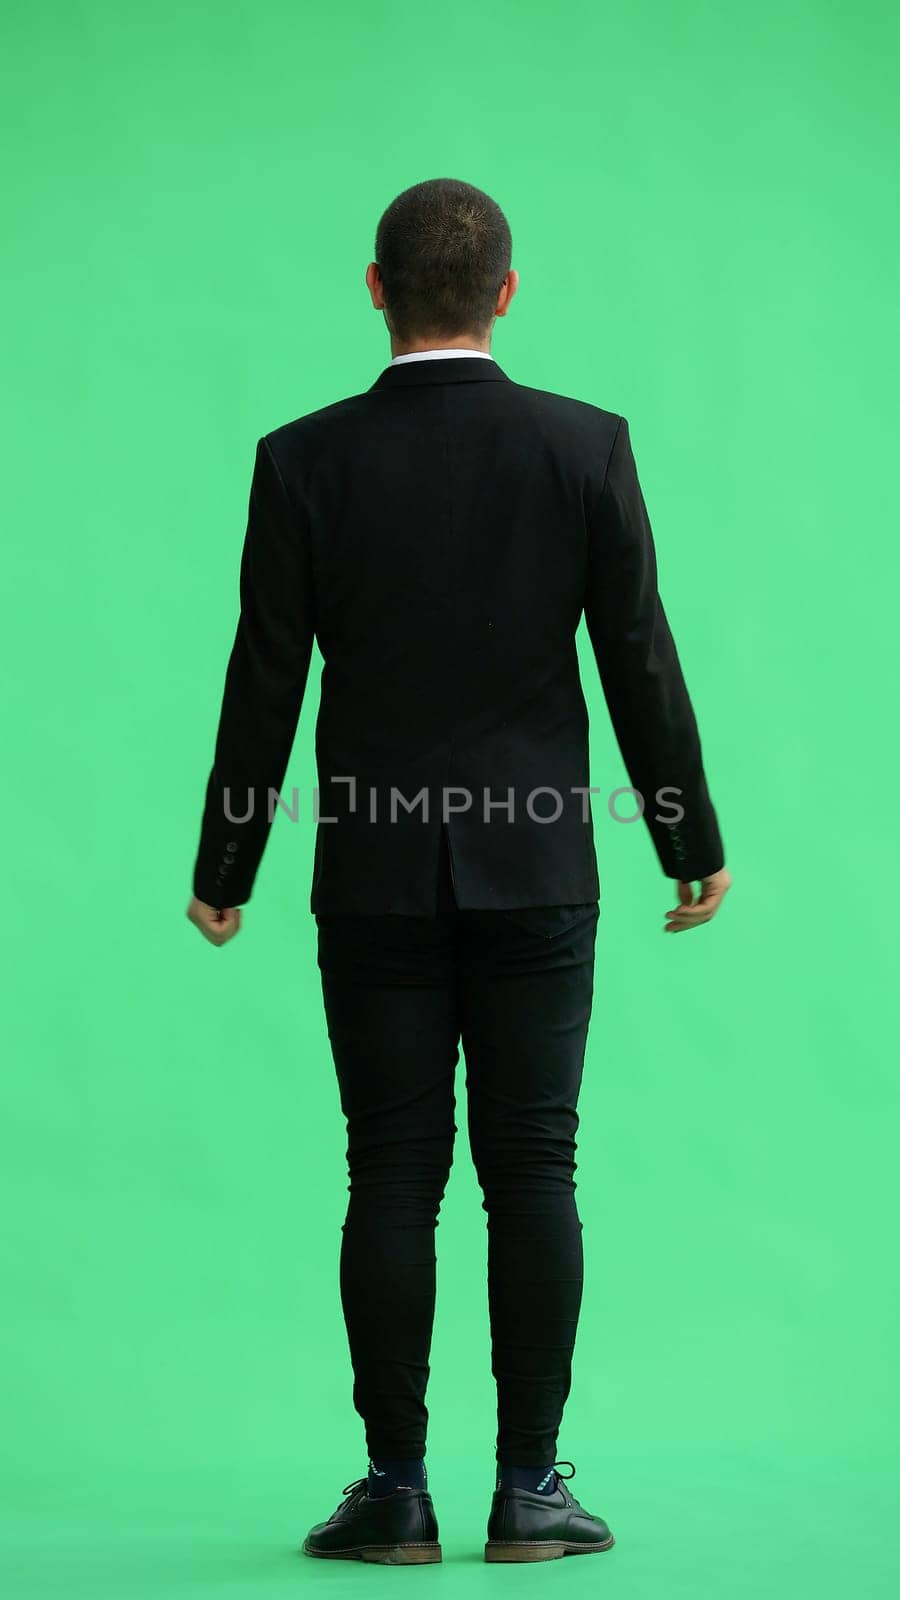 young man in full growth. isolated on green background. view from the back.